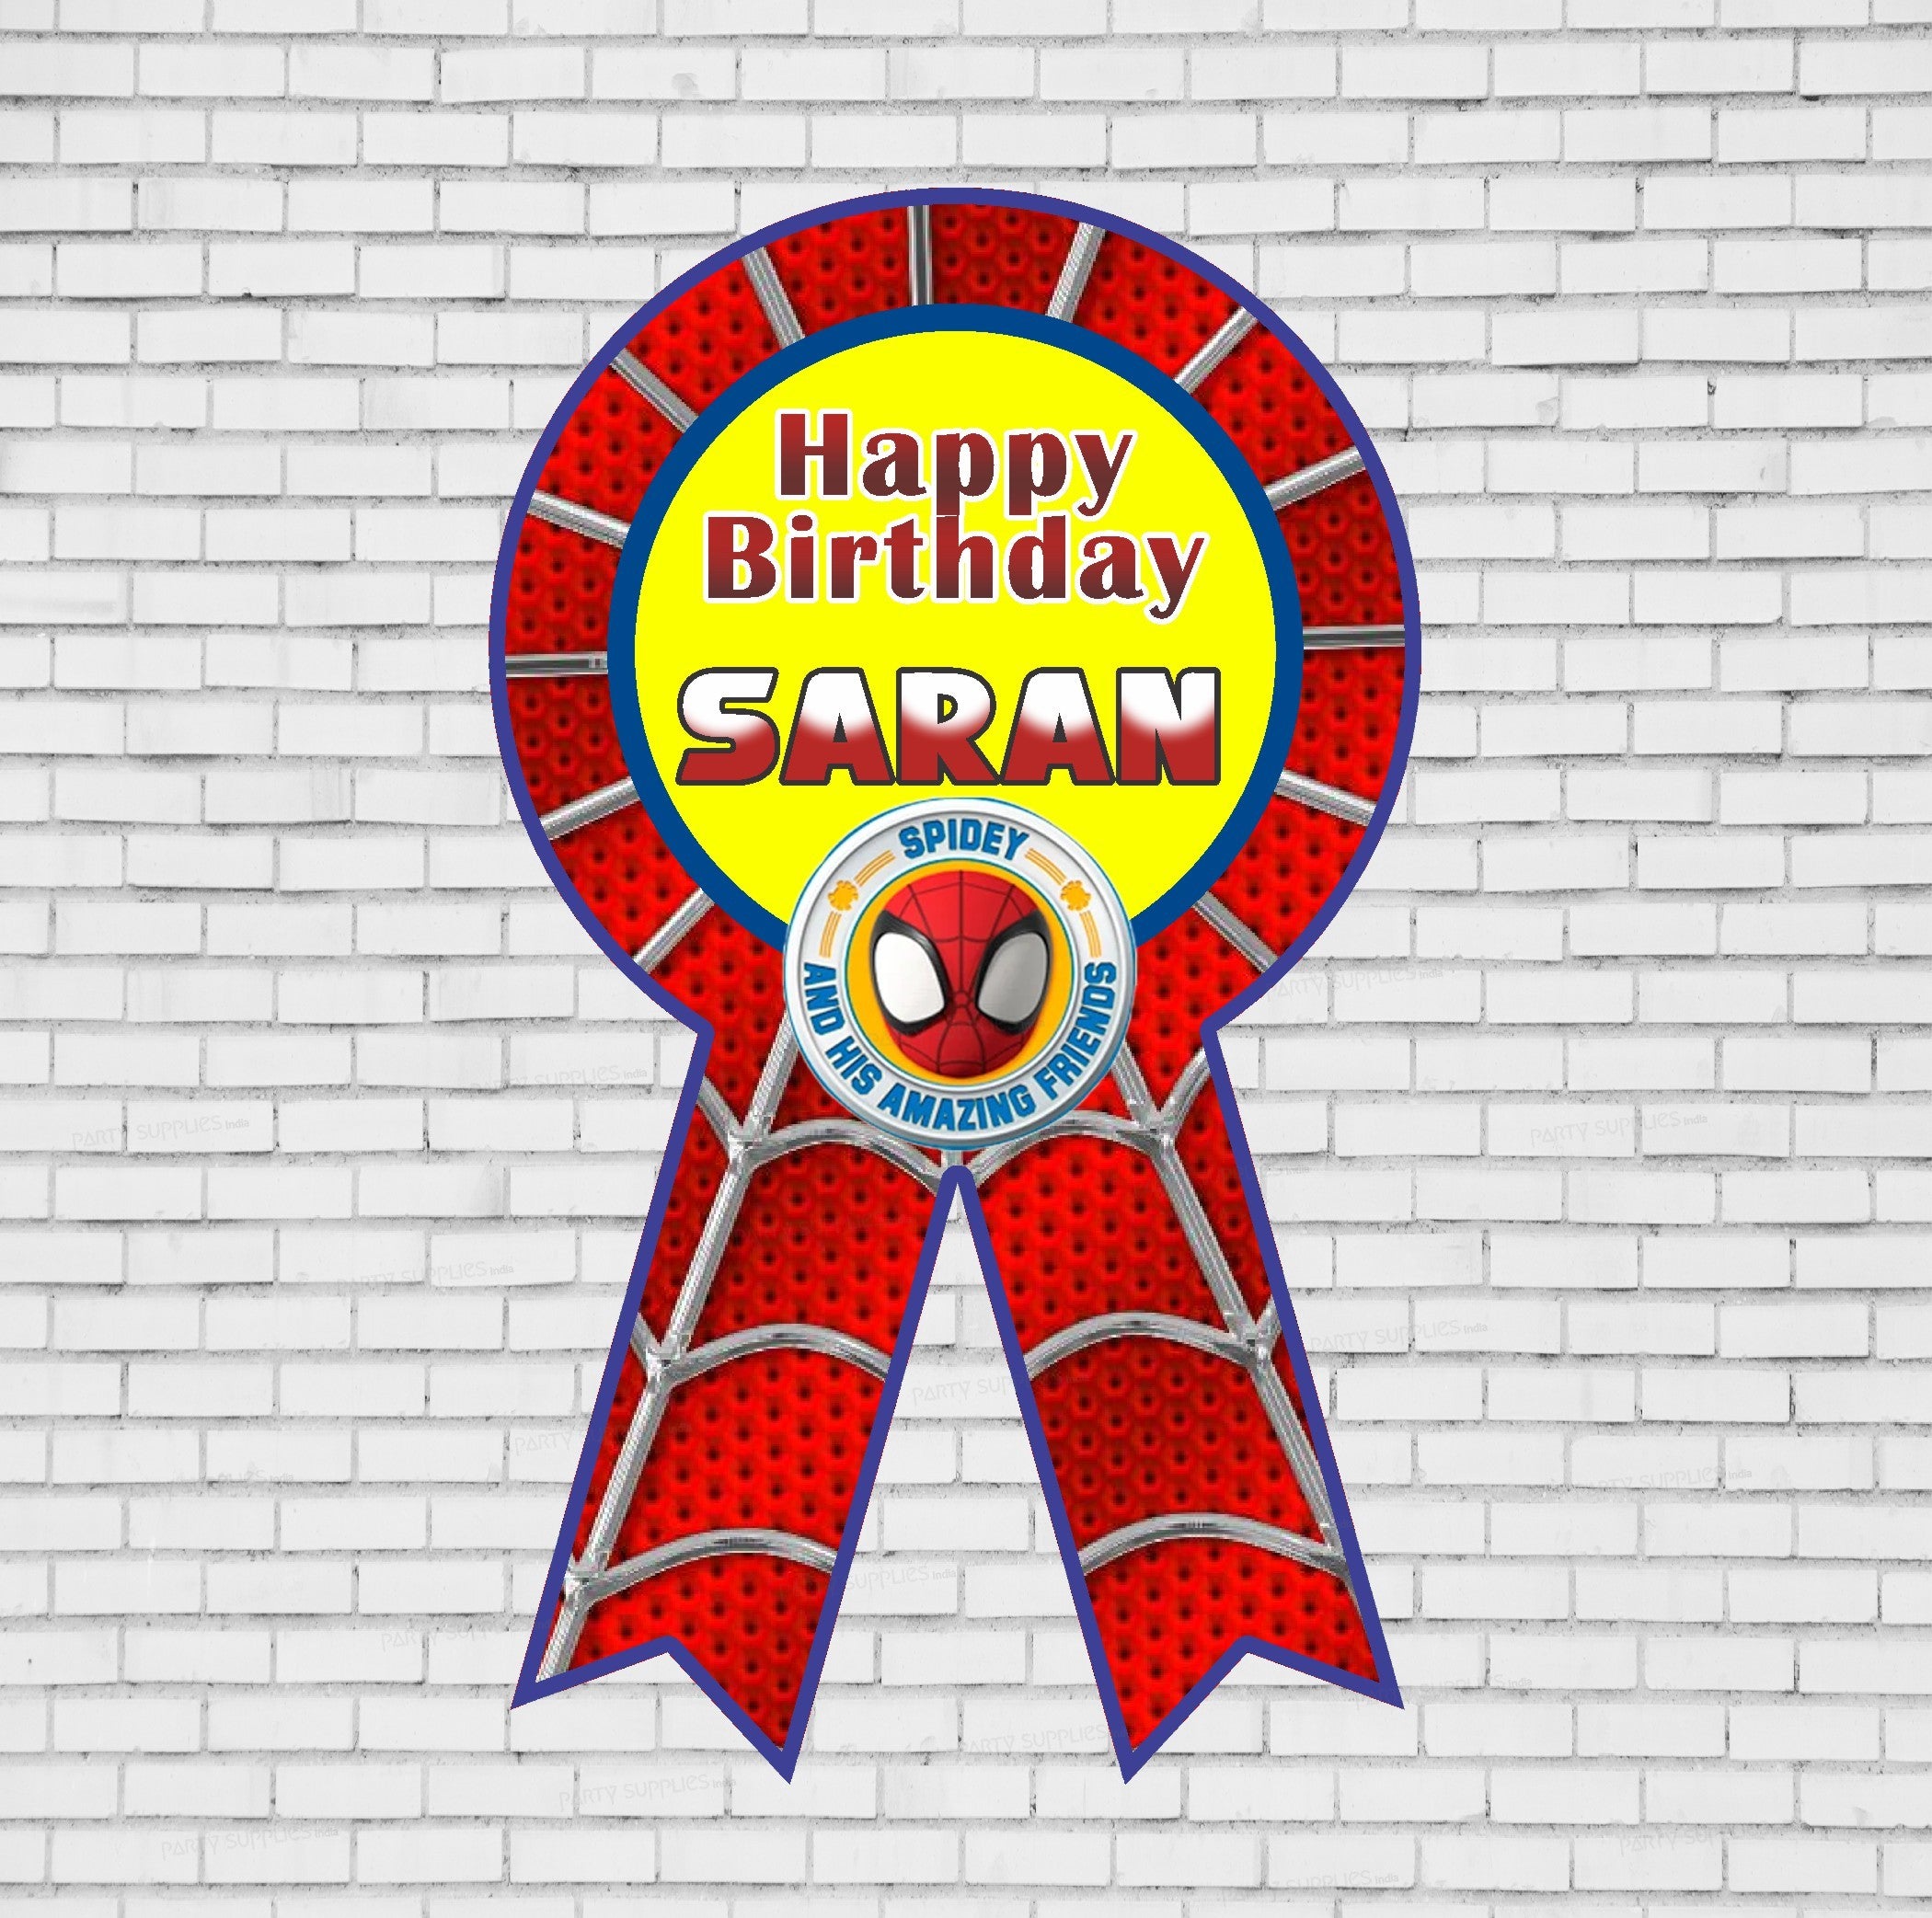 PSI Spidey and his Amazing Friends Theme BADGES